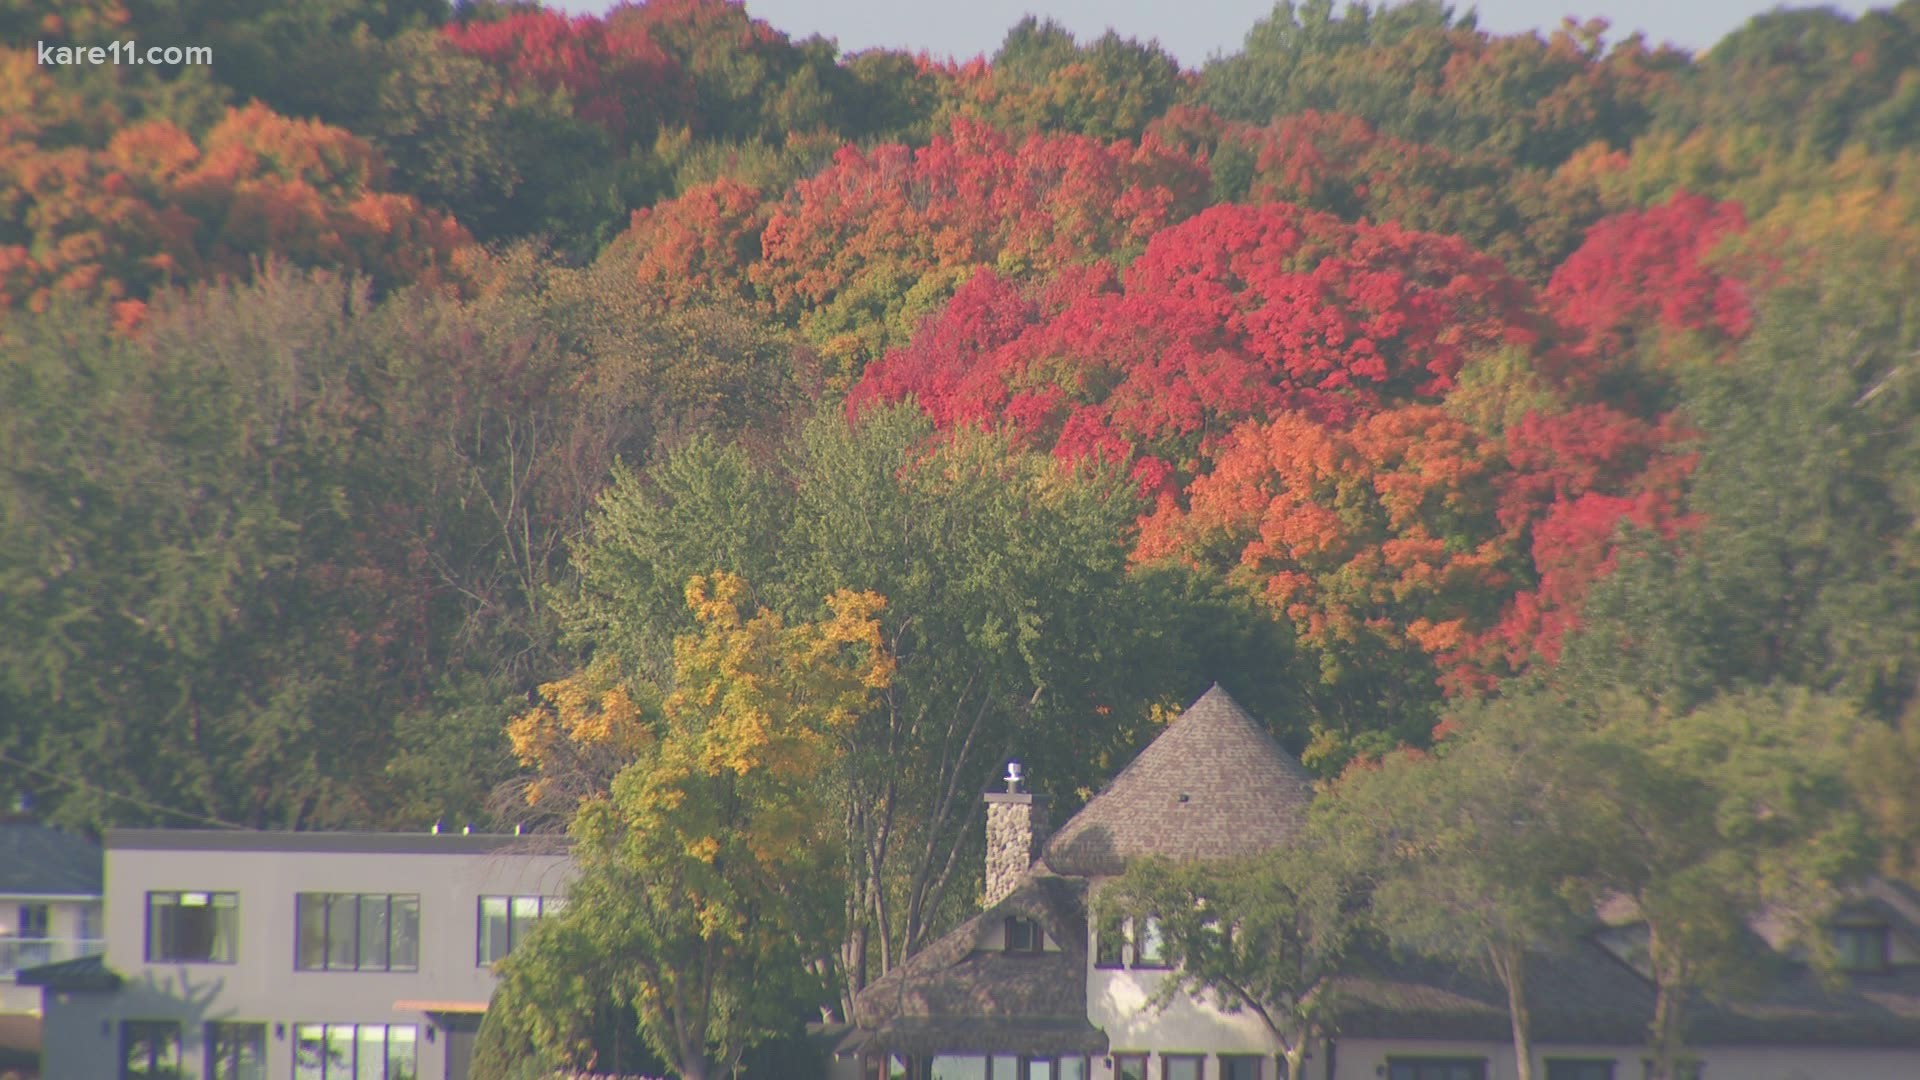 Eric Perkins shows us another great area to exercise and see the beautiful fall foliage